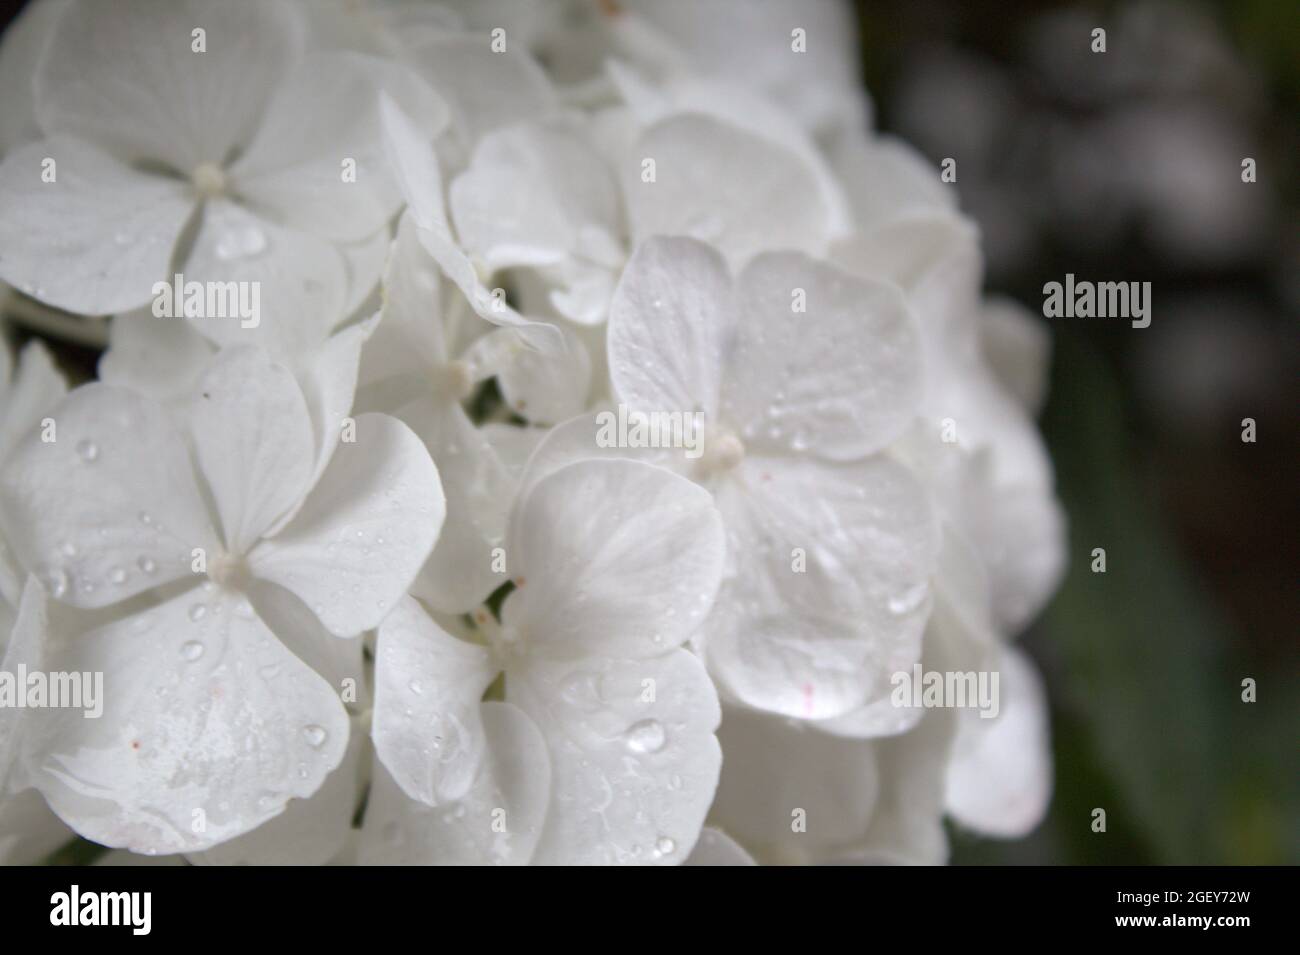 White hydrangea in focus with water drops and dark background. Rich in contrast. Stock Photo